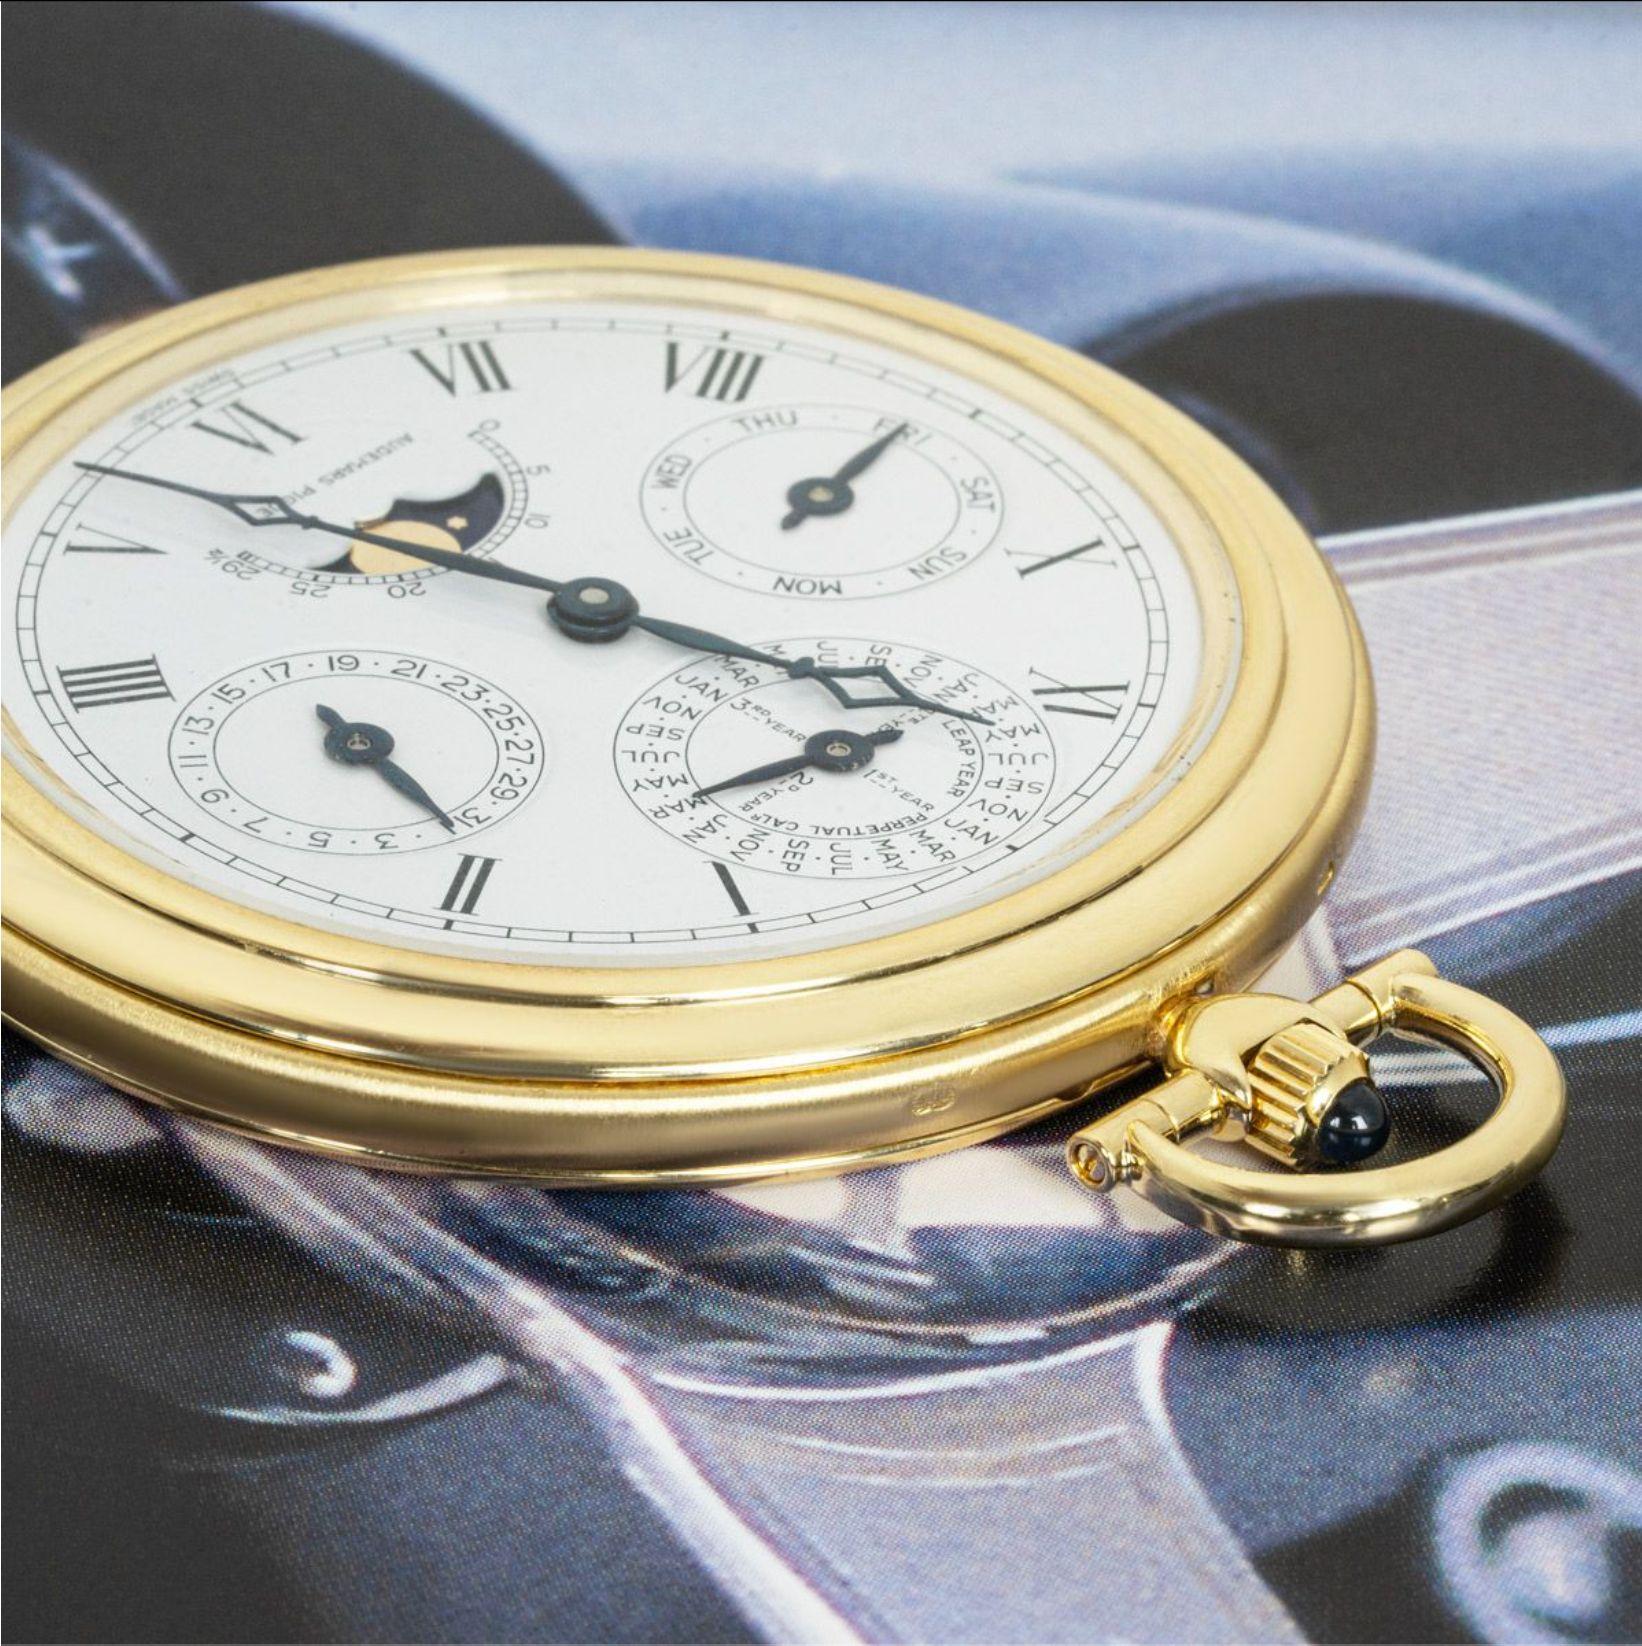 Audemars Piguet. A Yellow Gold Keyless Lever Perpetual Calendar Pocket Watch C1970

Dial: The Beautiful white enamel dial with Roman numerals outer minute track with subsidiary dials for the four year perpetual calendar cycle at twelve o'clock , the